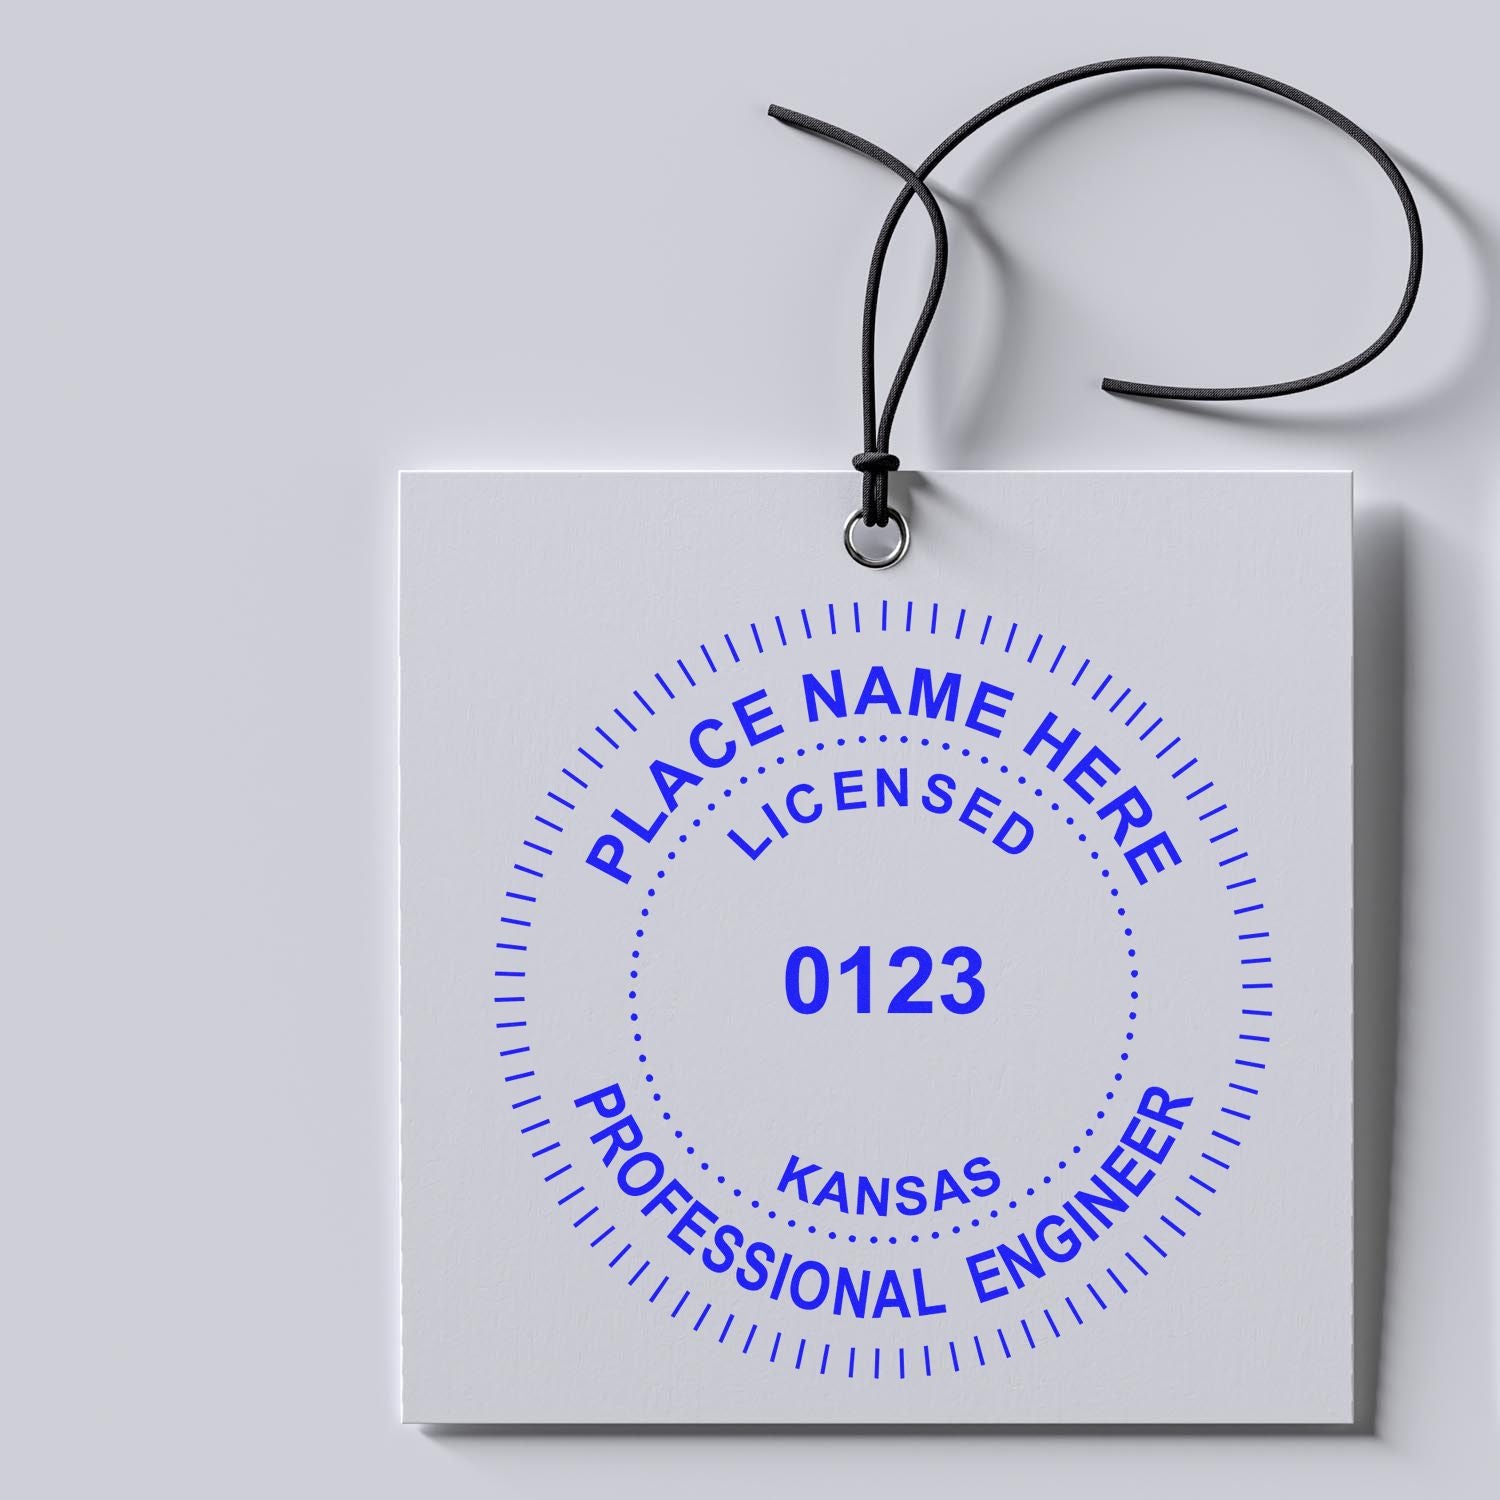 The main image for the Premium MaxLight Pre-Inked Kansas Engineering Stamp depicting a sample of the imprint and electronic files